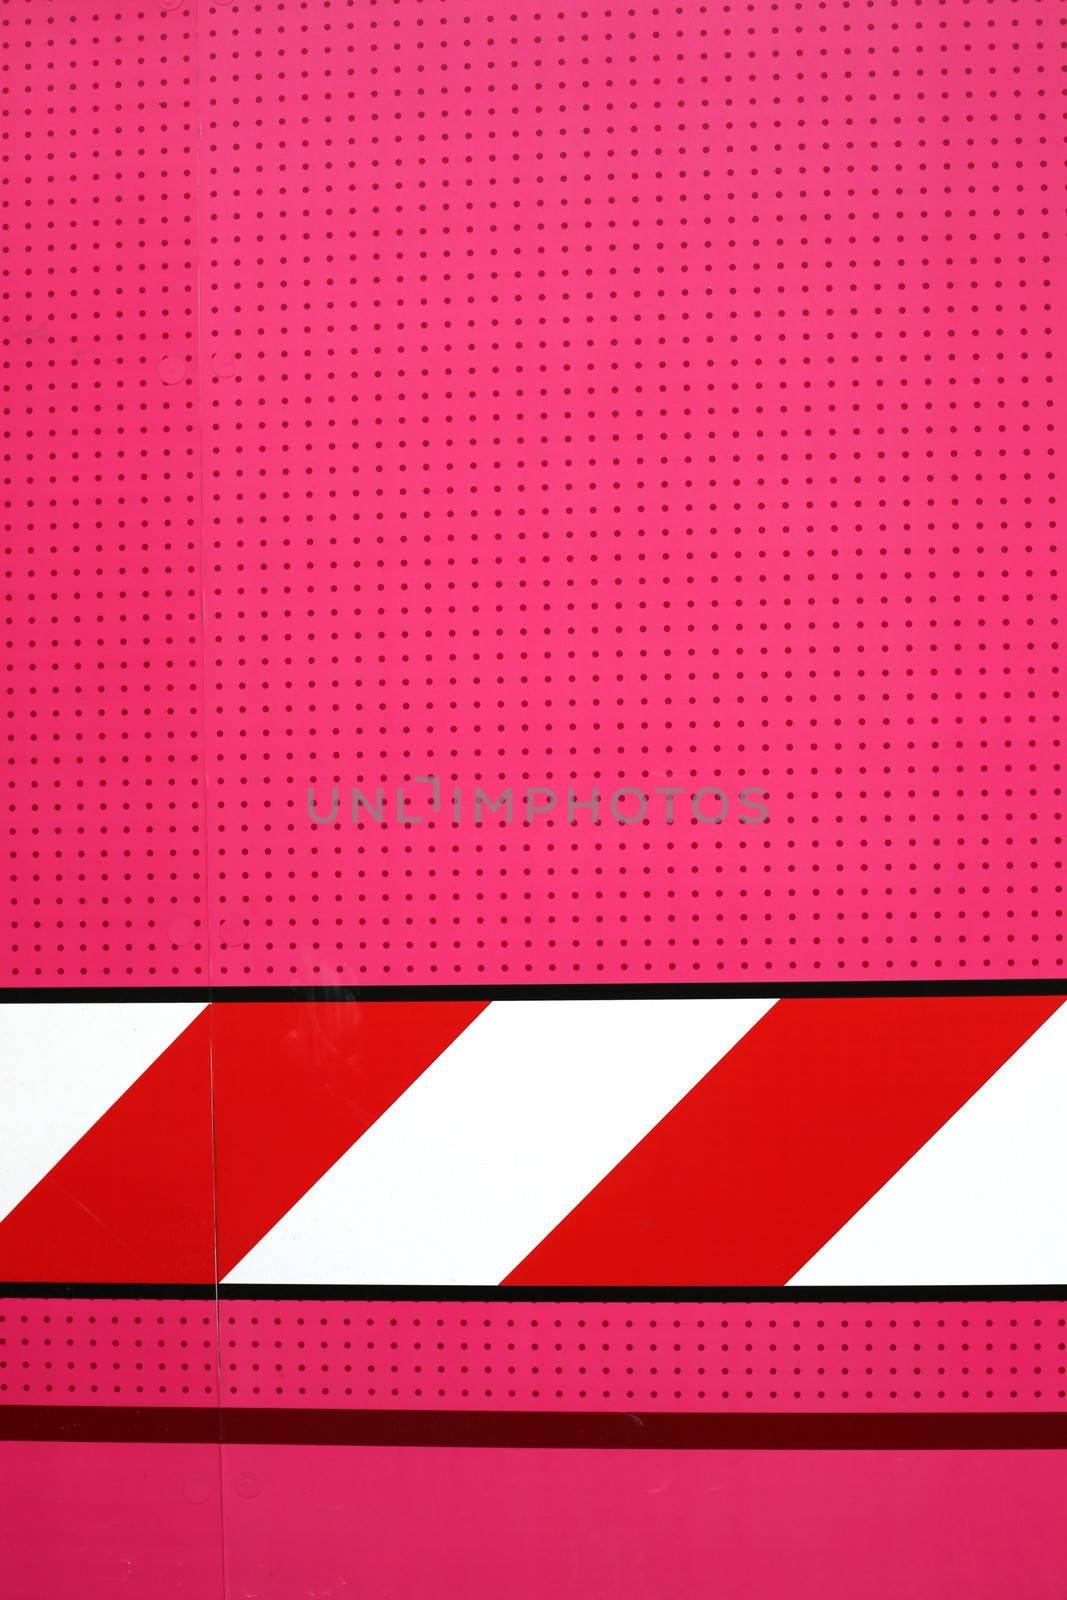 Construction Site Safety Barrier Oxford Street London by Whiteboxmedia